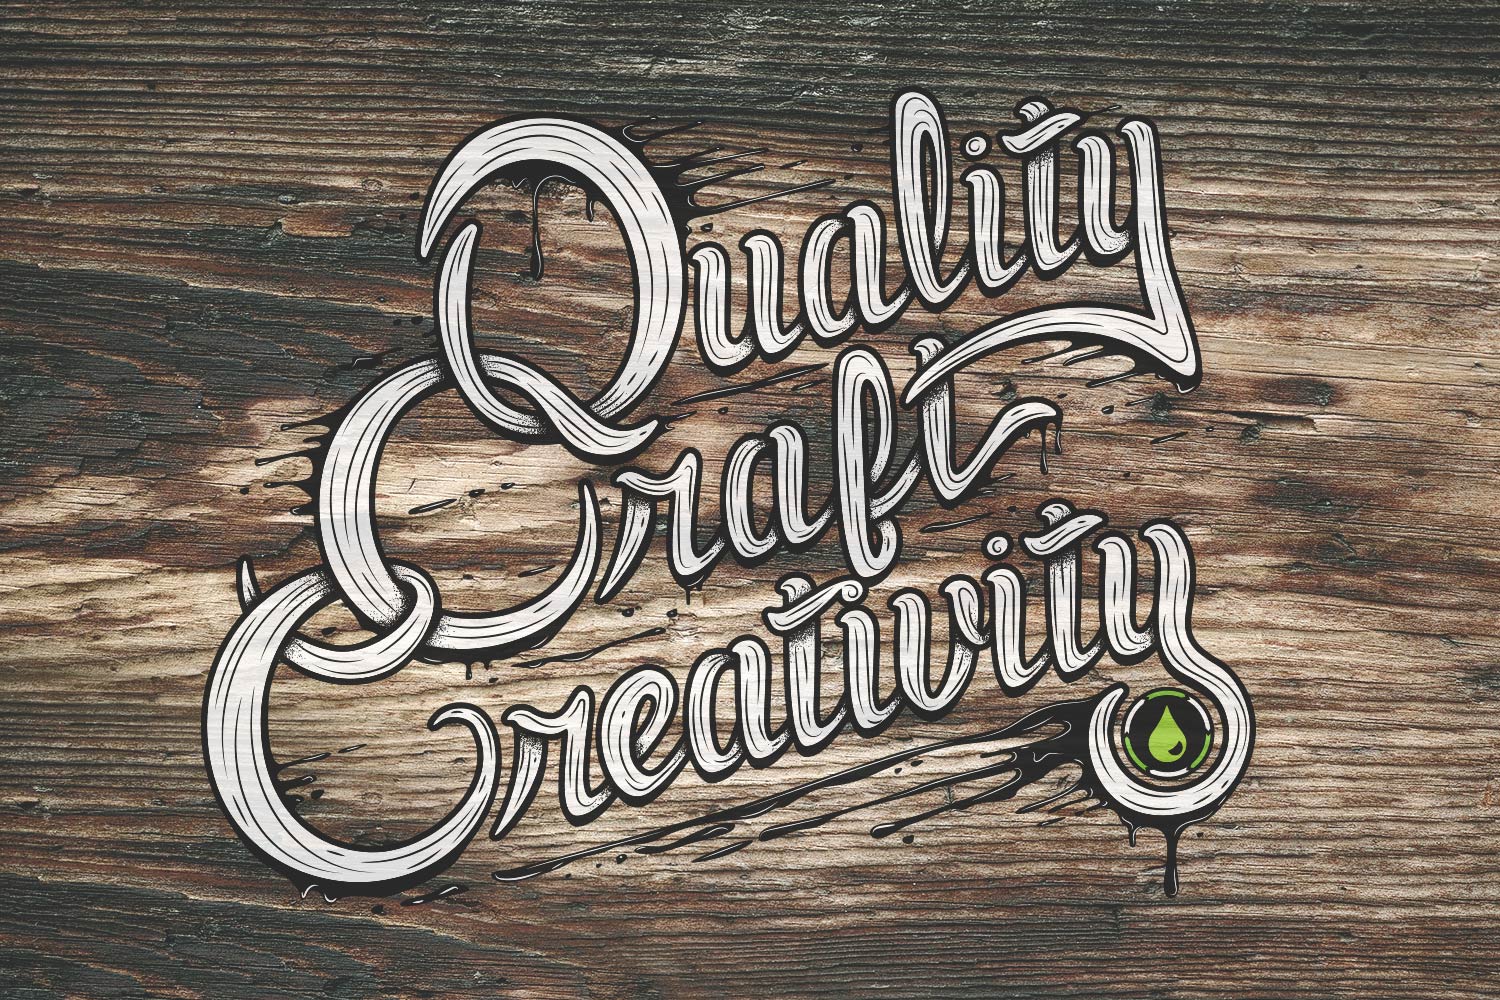 OffBeat Press - Quality Craft Creativity sign with wooden background